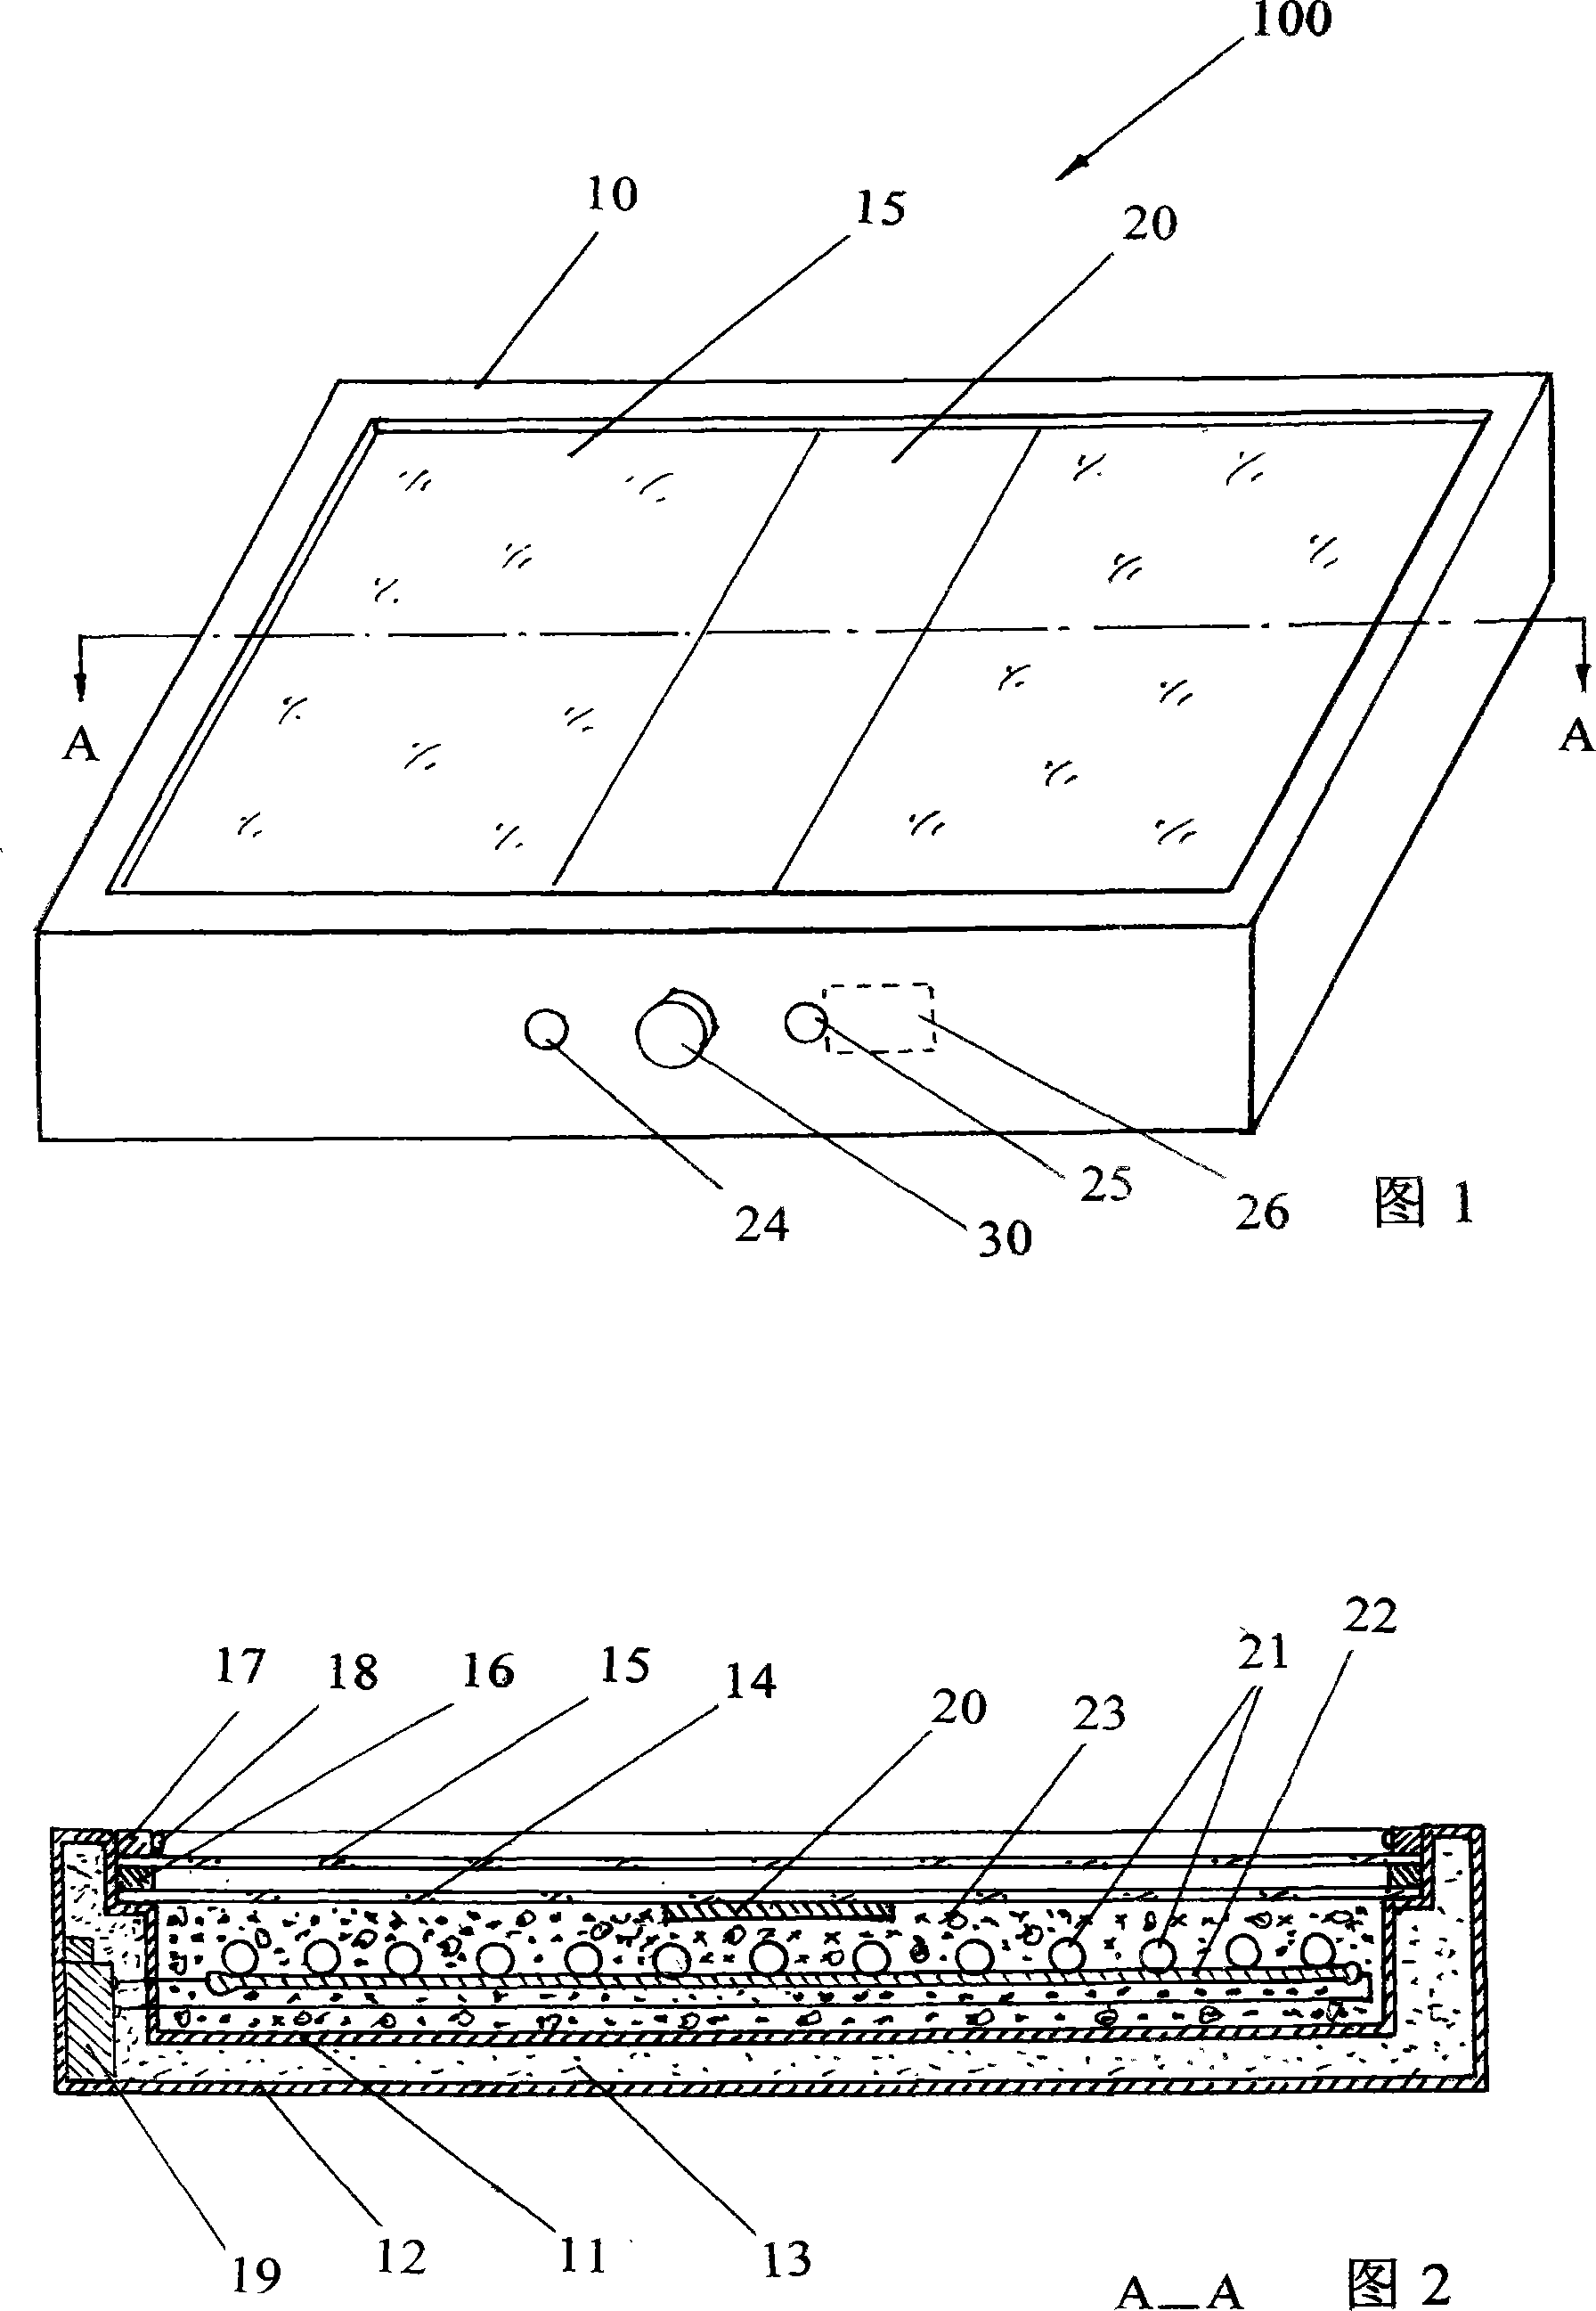 Water heater of solar energy in type of power generation stored energy